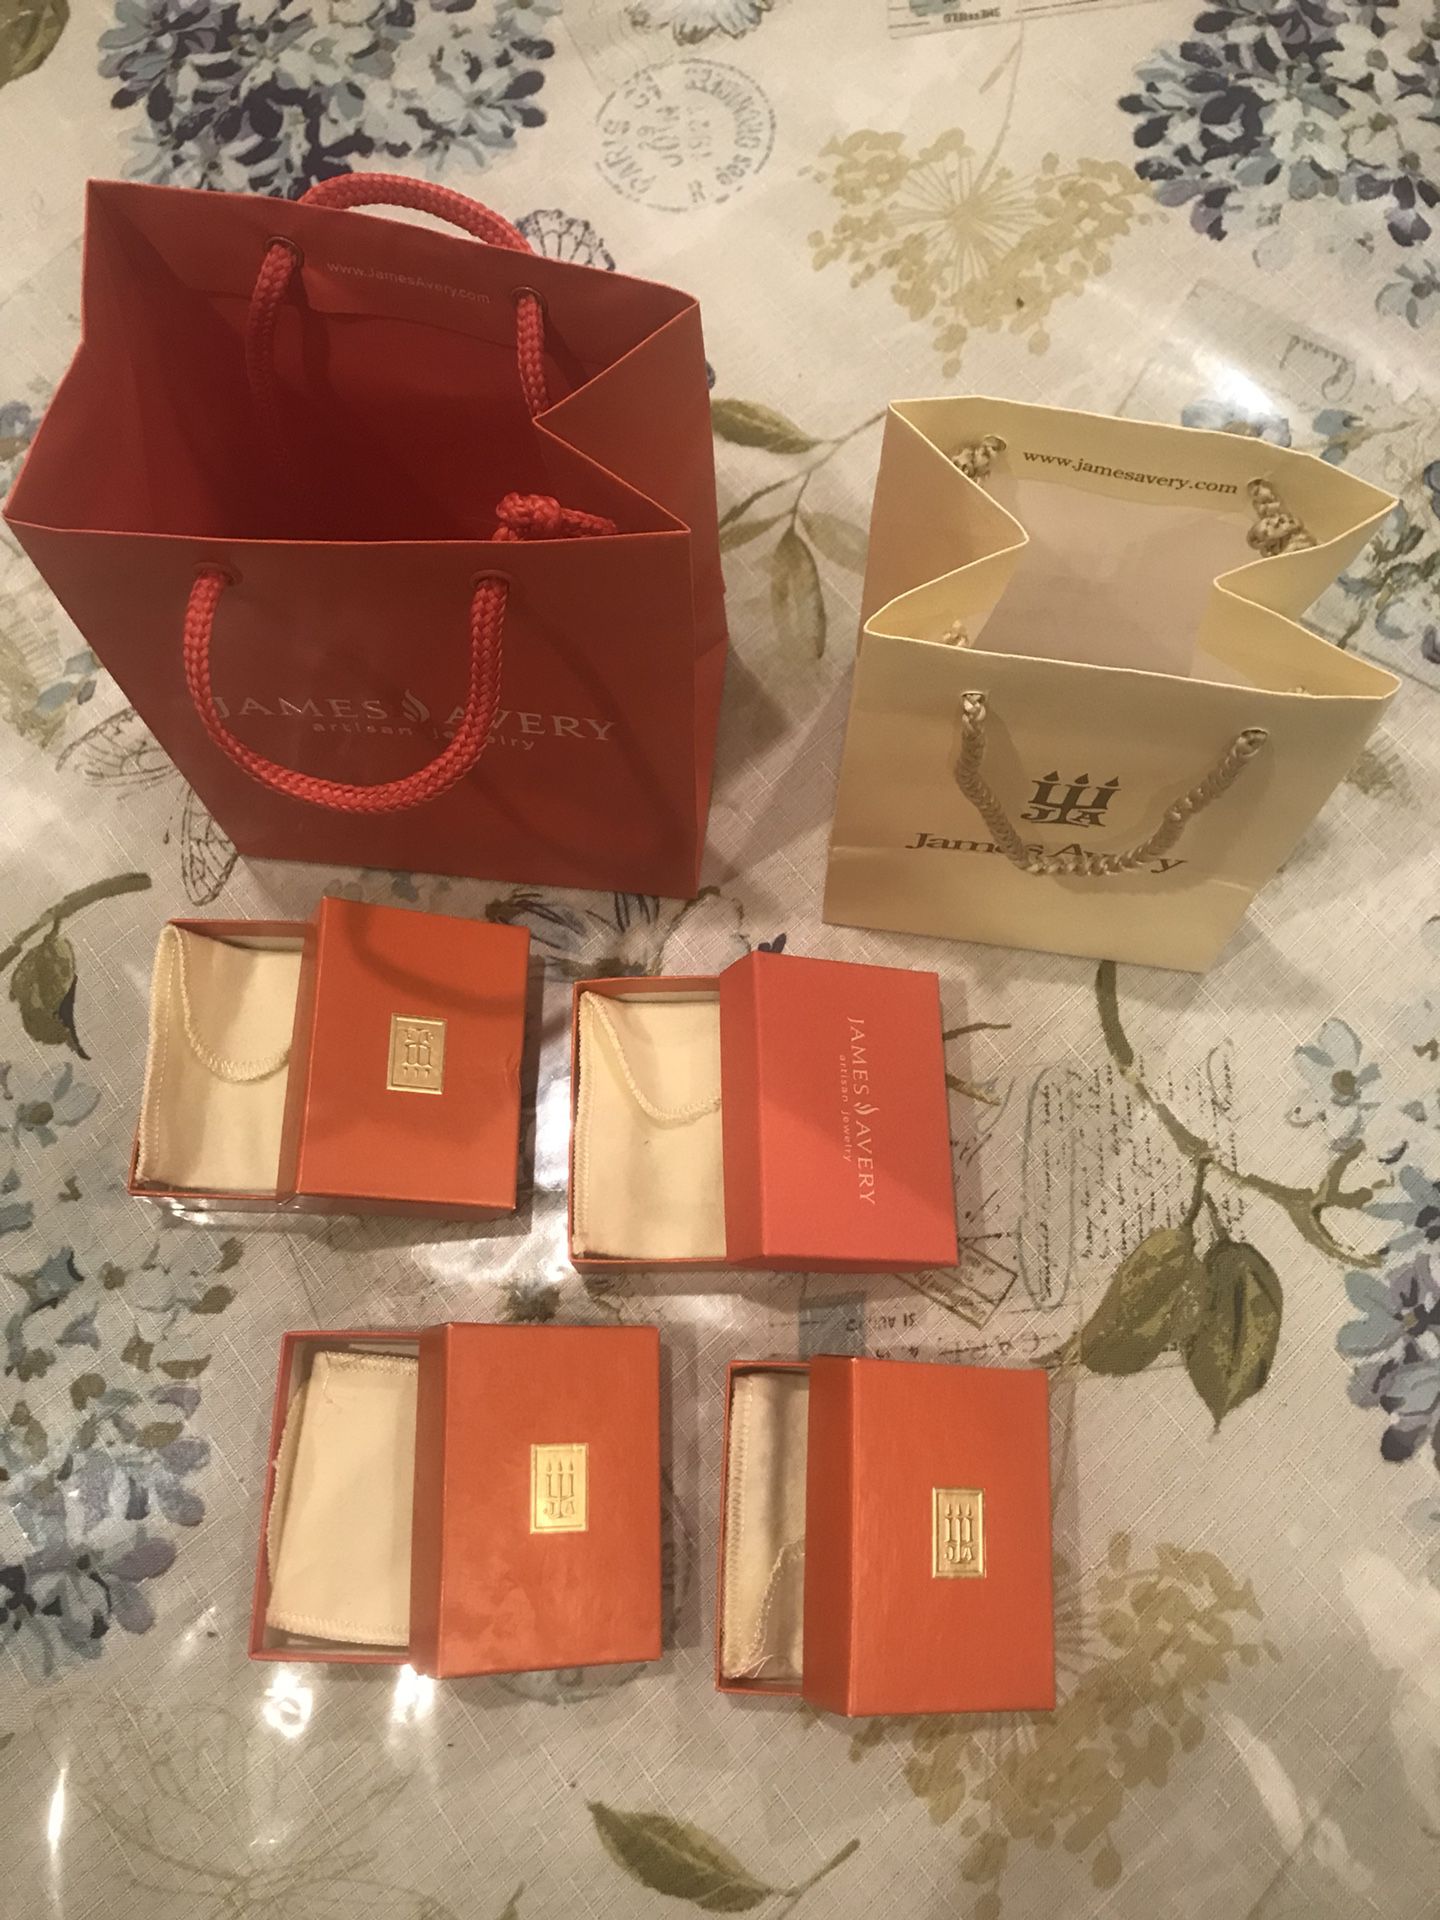 James Avery gift bags and boxes